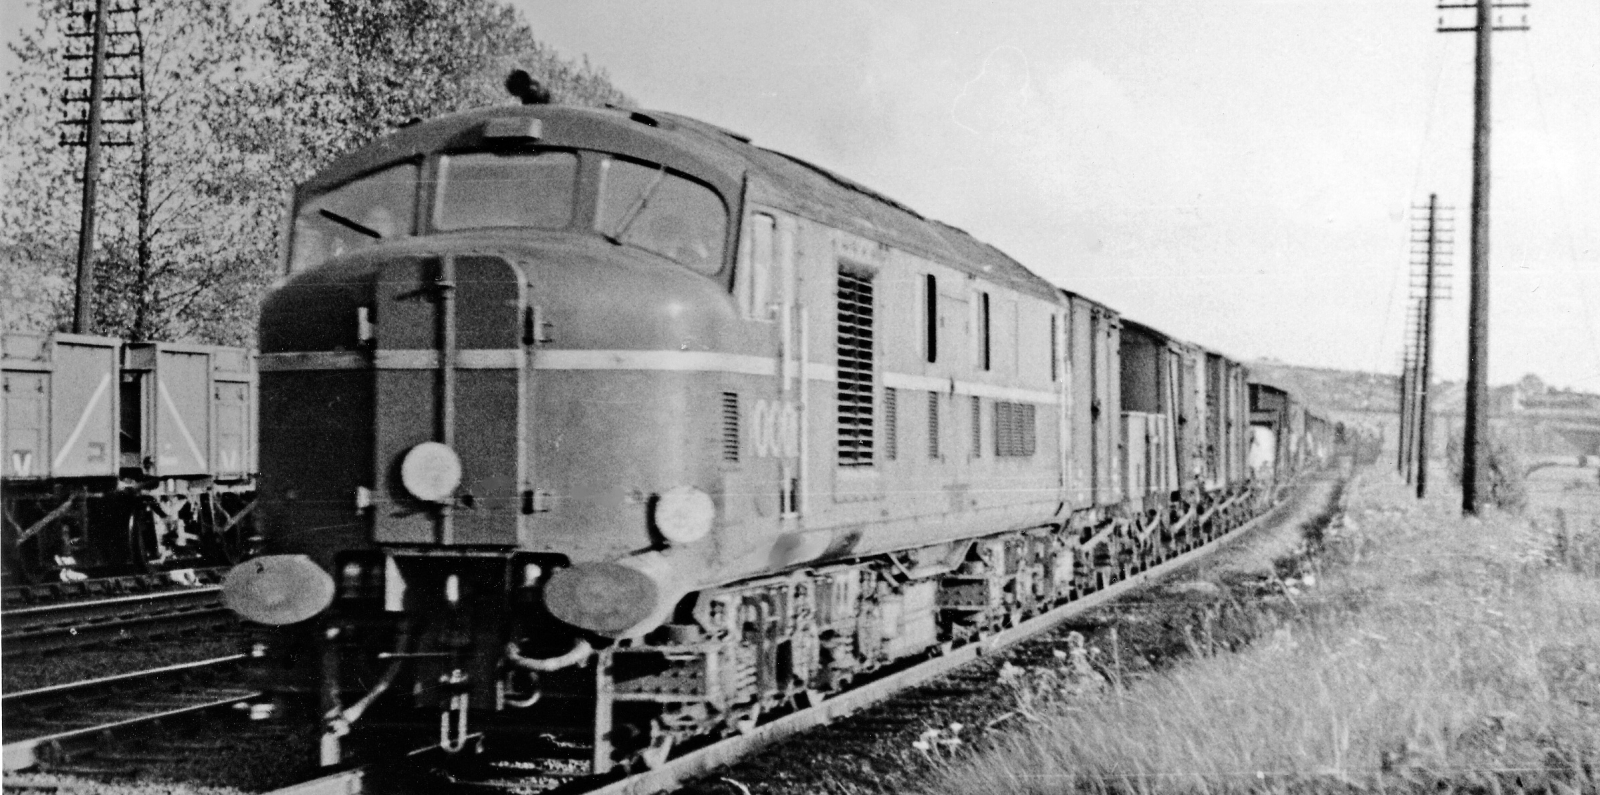 No. 10001 in October 1950 on the West Coast Main Line near Tring